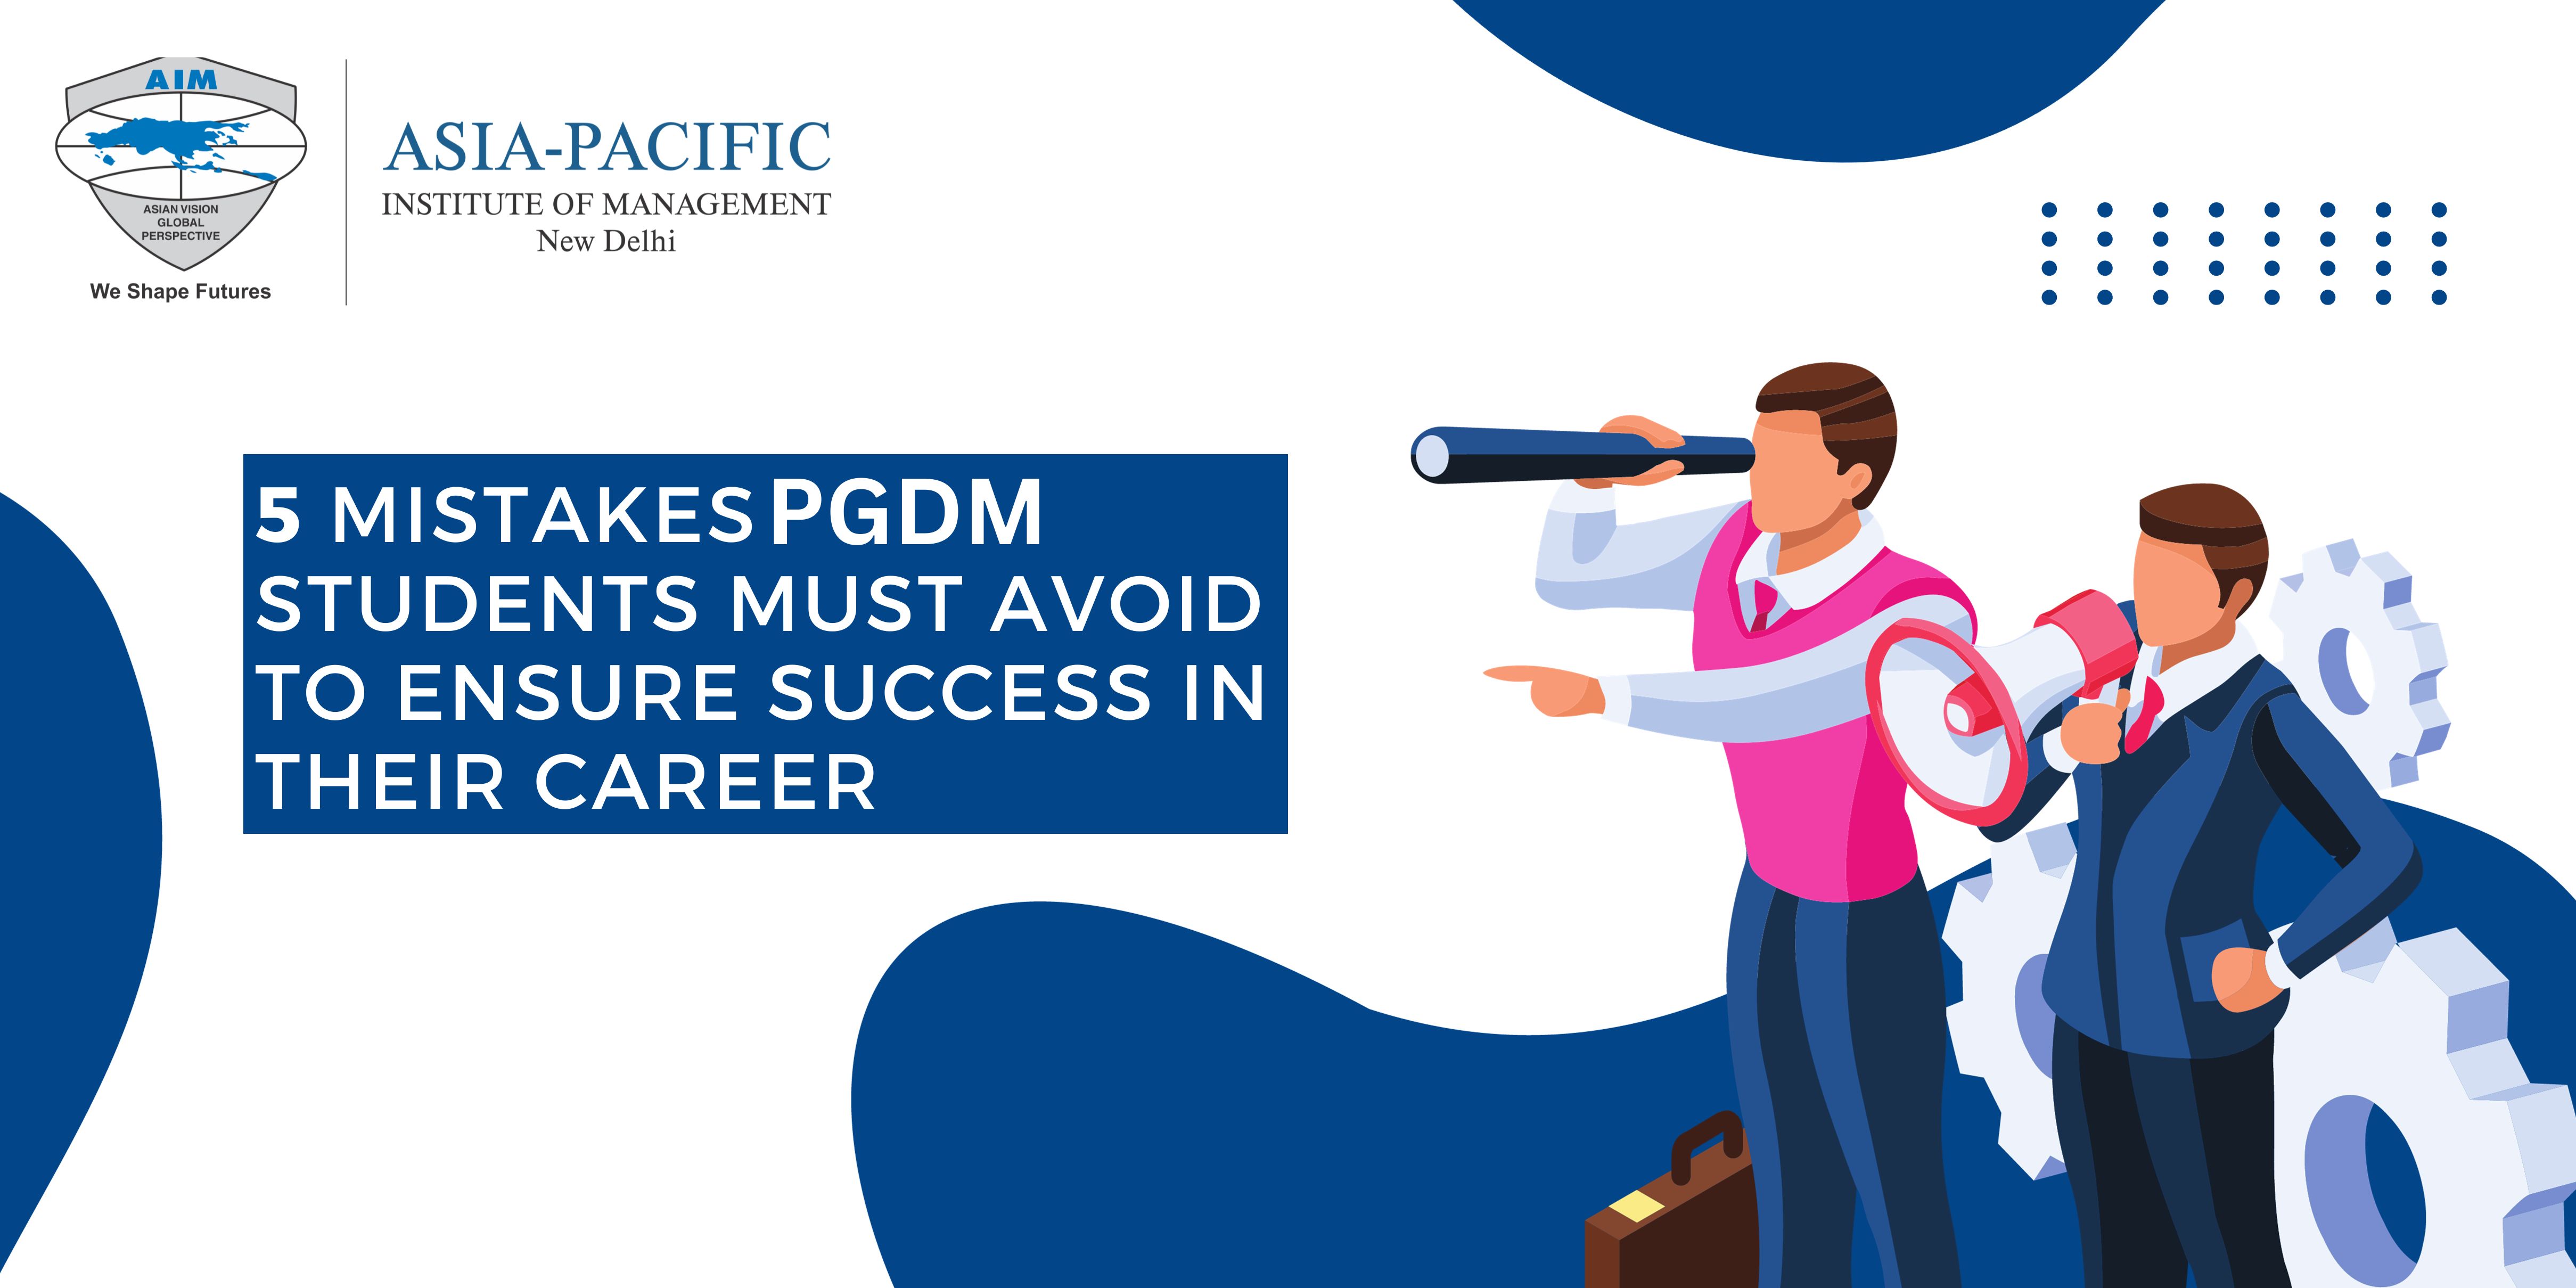 5 Mistakes PGDM Students